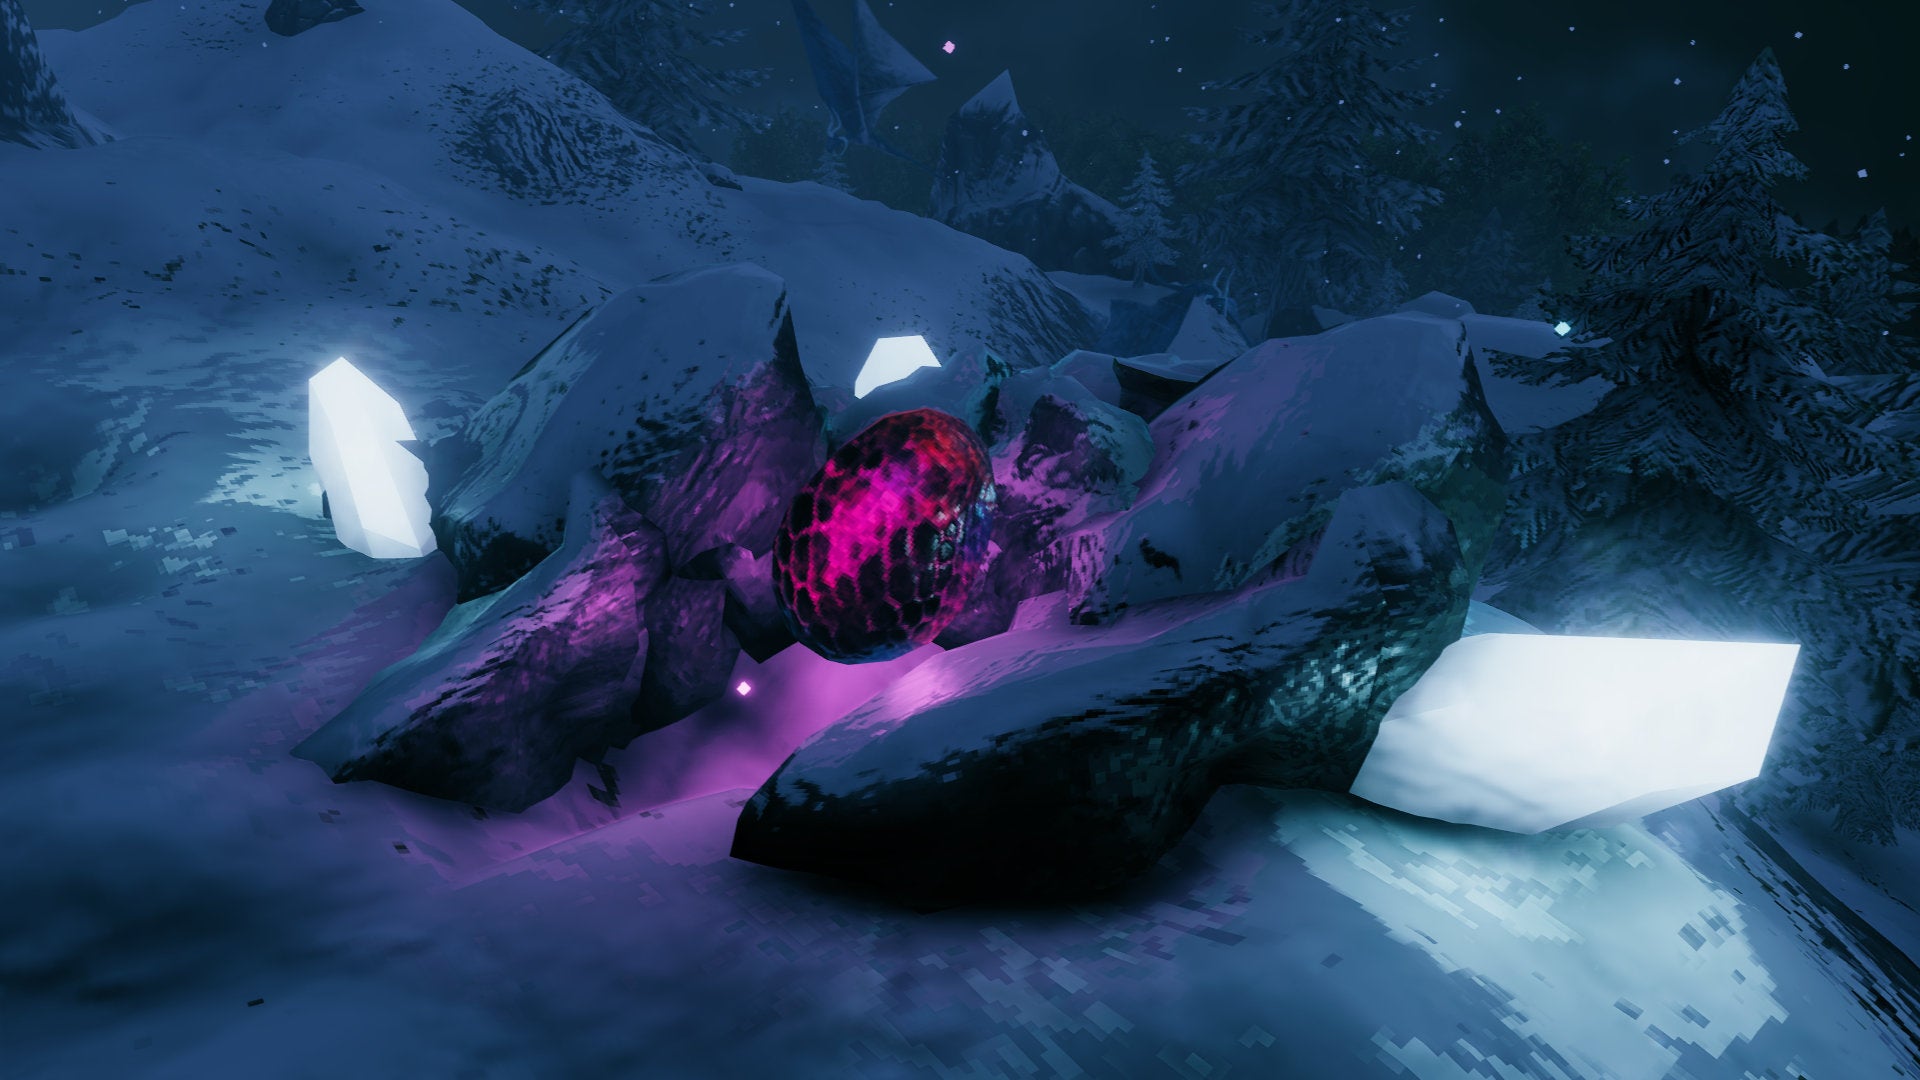 A Valheim screenshot of a Dragon Egg, glowing purple against the white snow of the surrounding Mountain terrain.